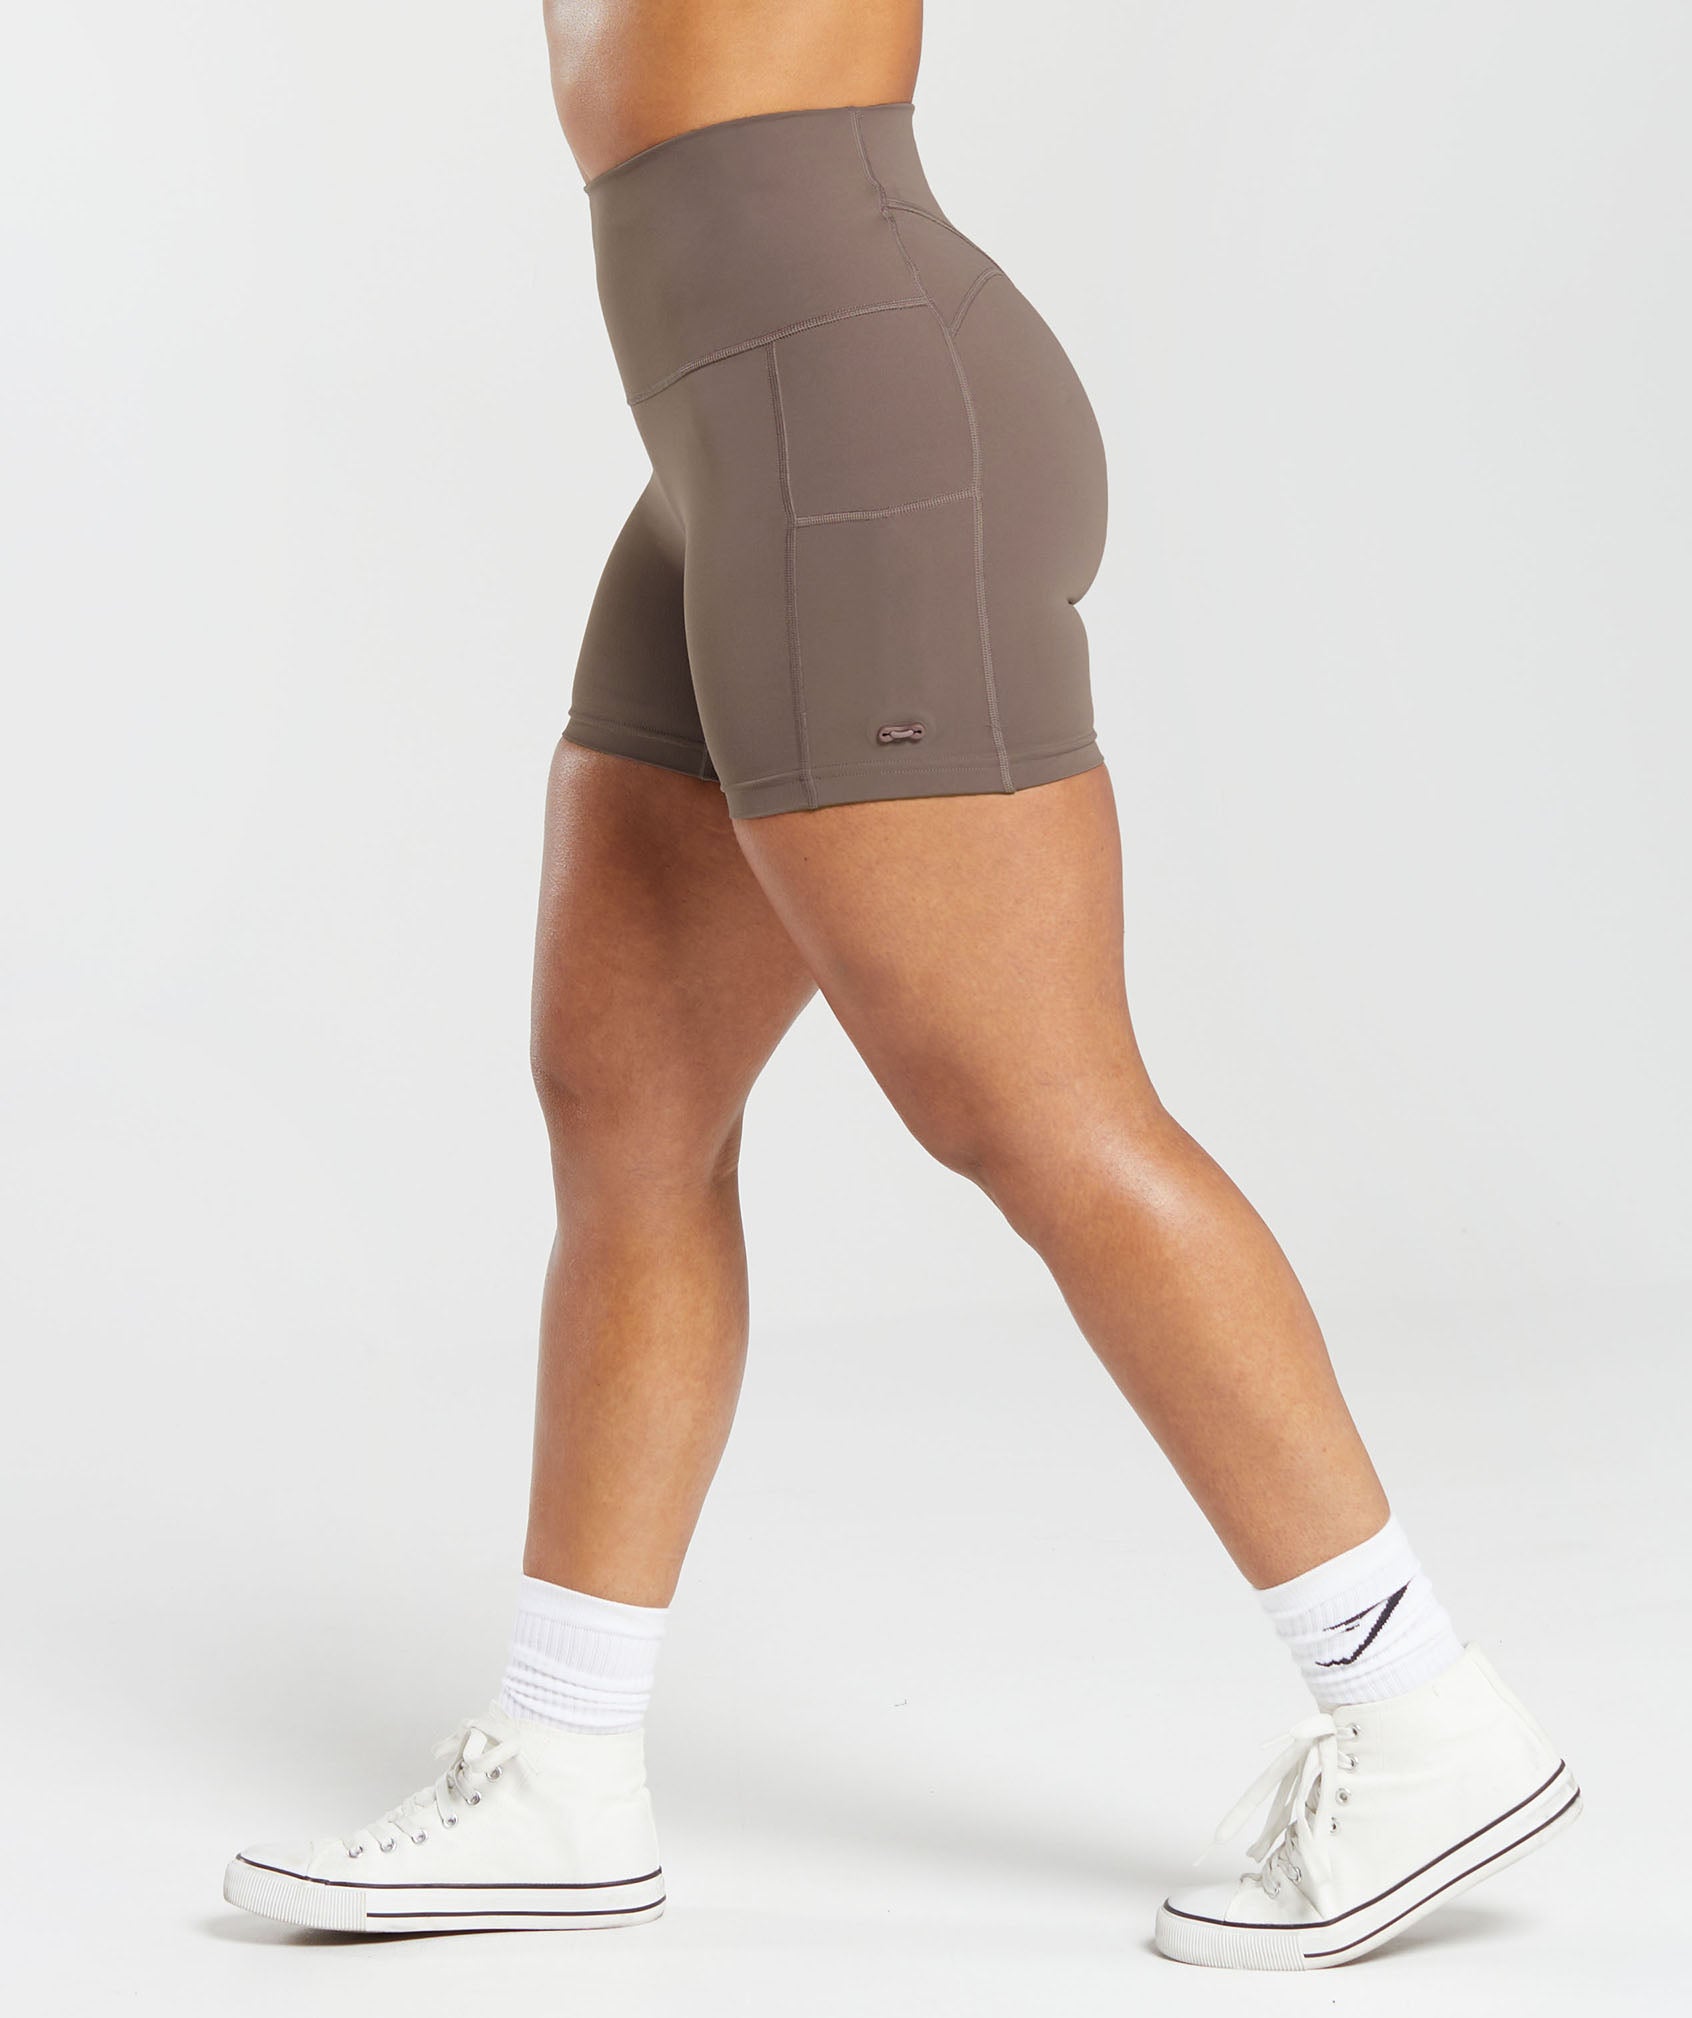 Legacy Tight Shorts in Walnut Mauve - view 3